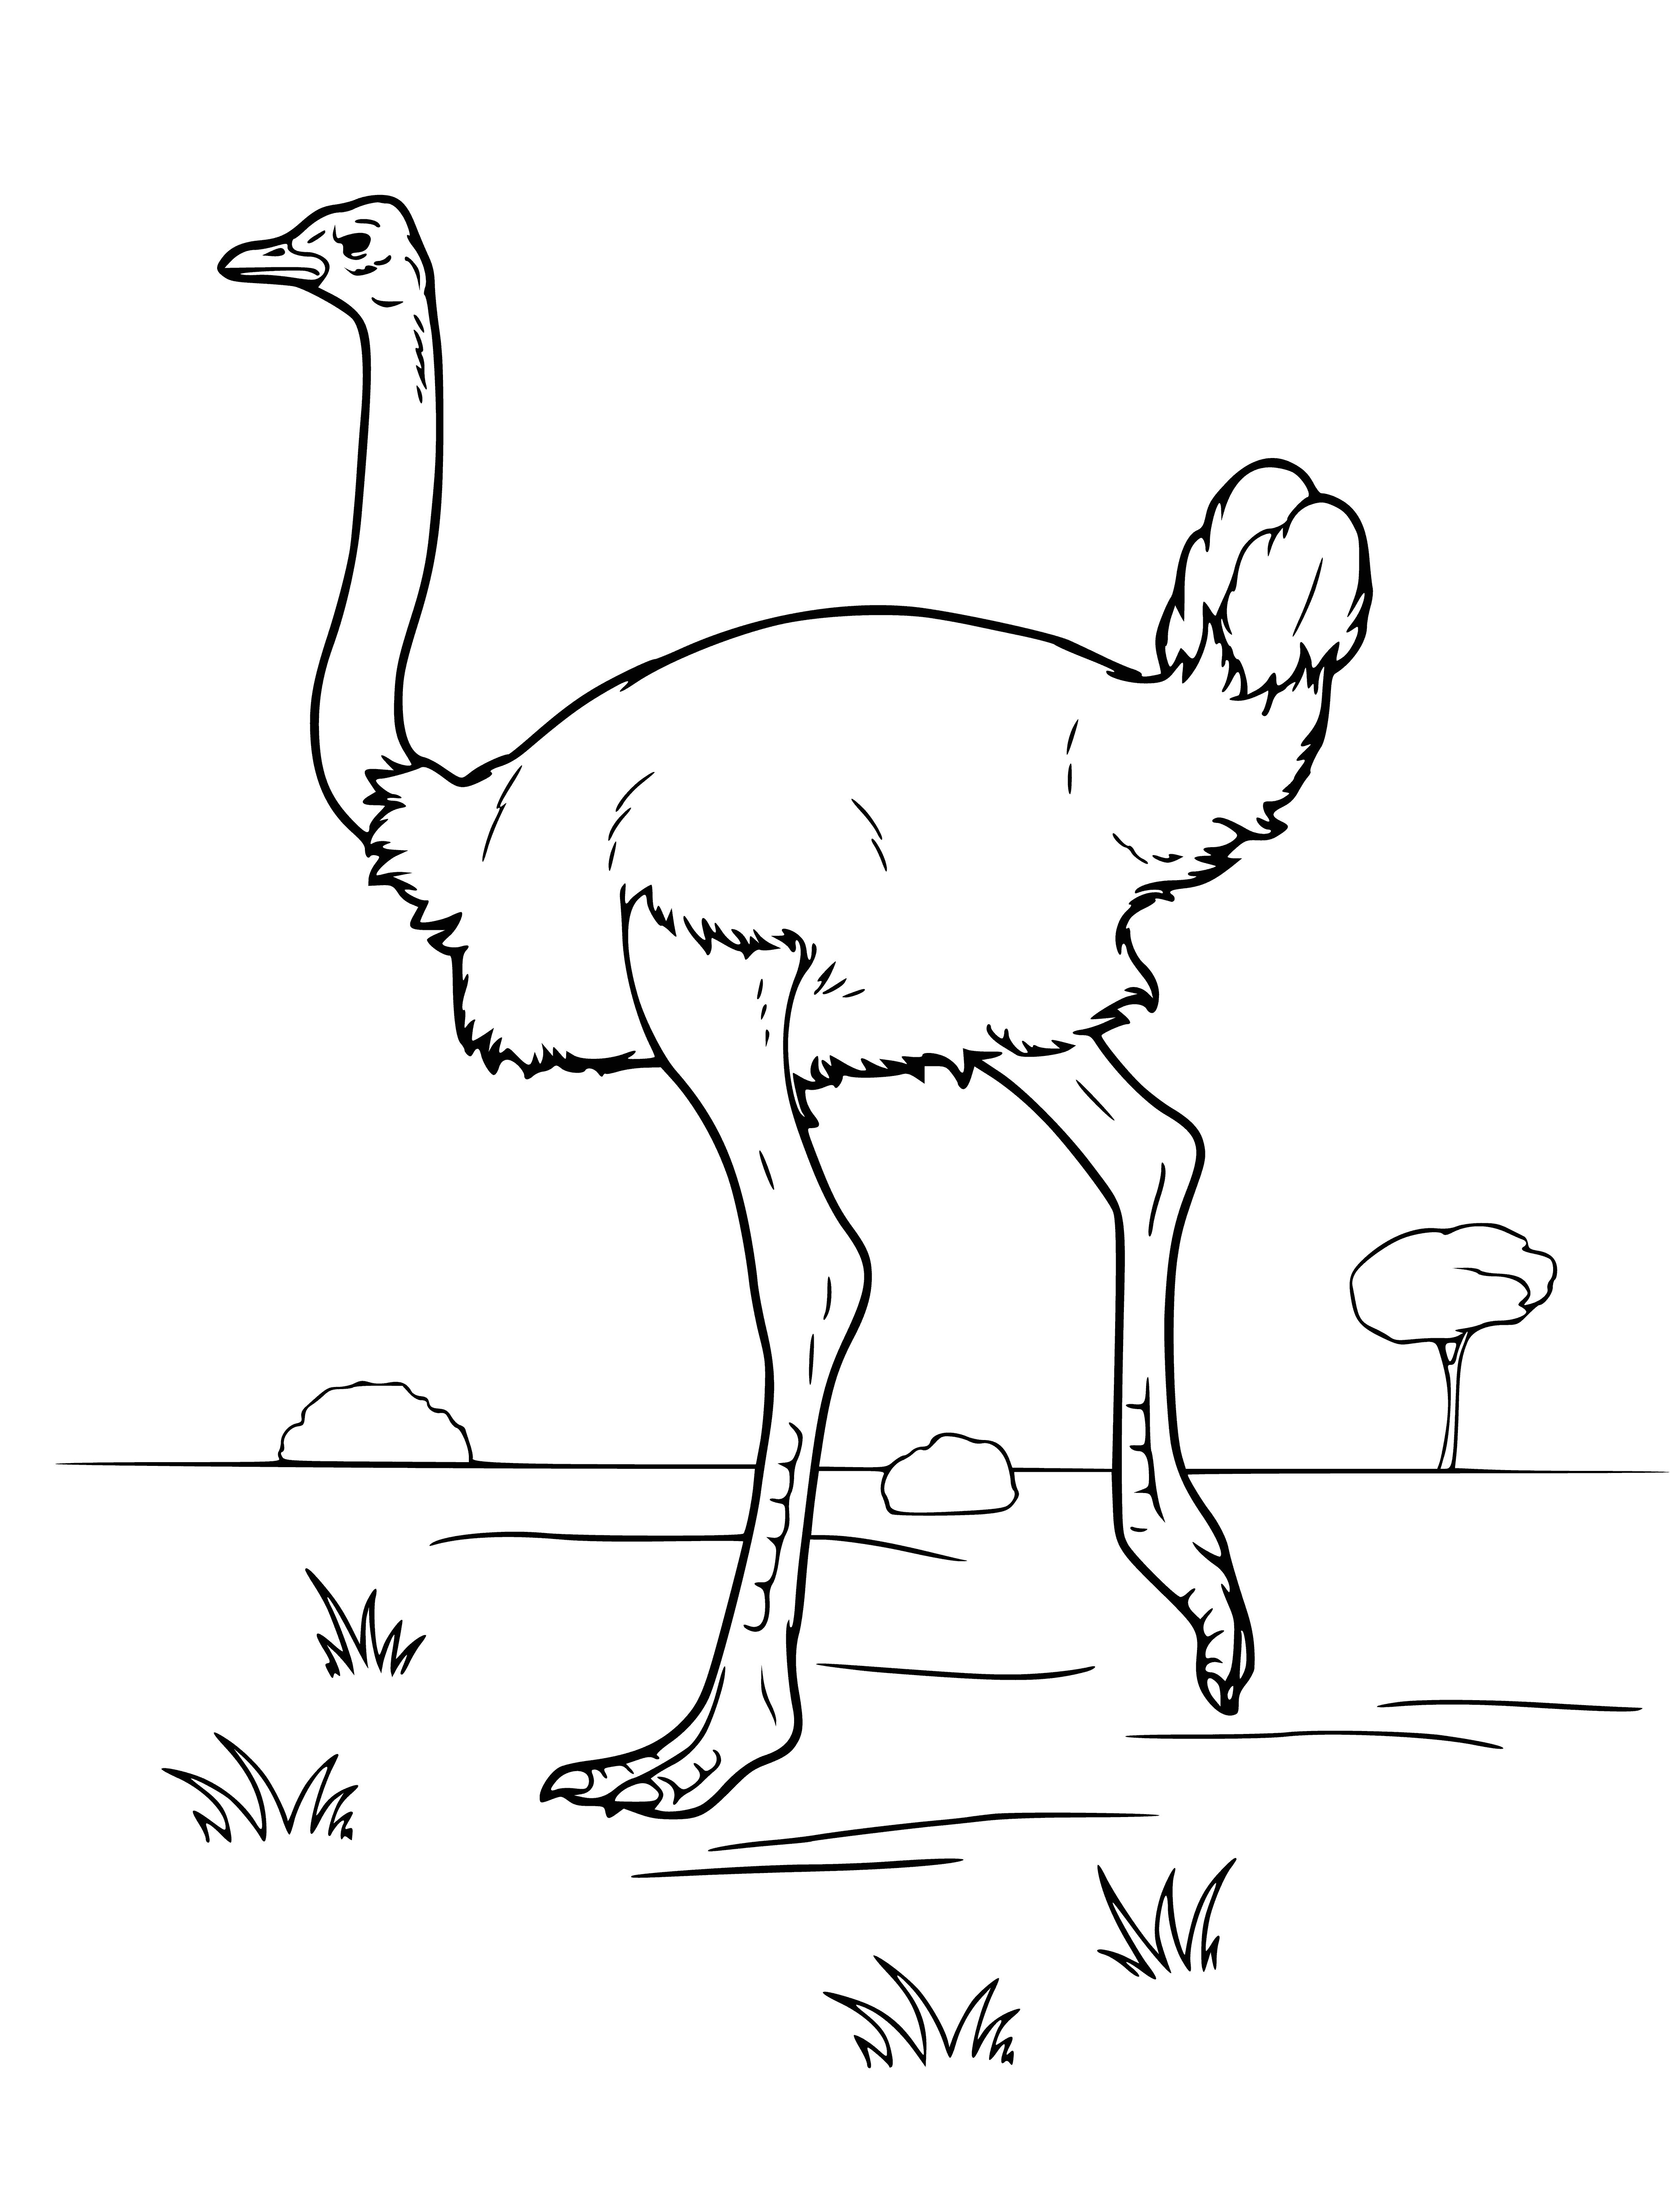 coloring page: Ostrich is largest bird native to Africa, growing up to 9ft tall. Brown & white with long legs & neck, and small head. Diet consists of plants & fruits.